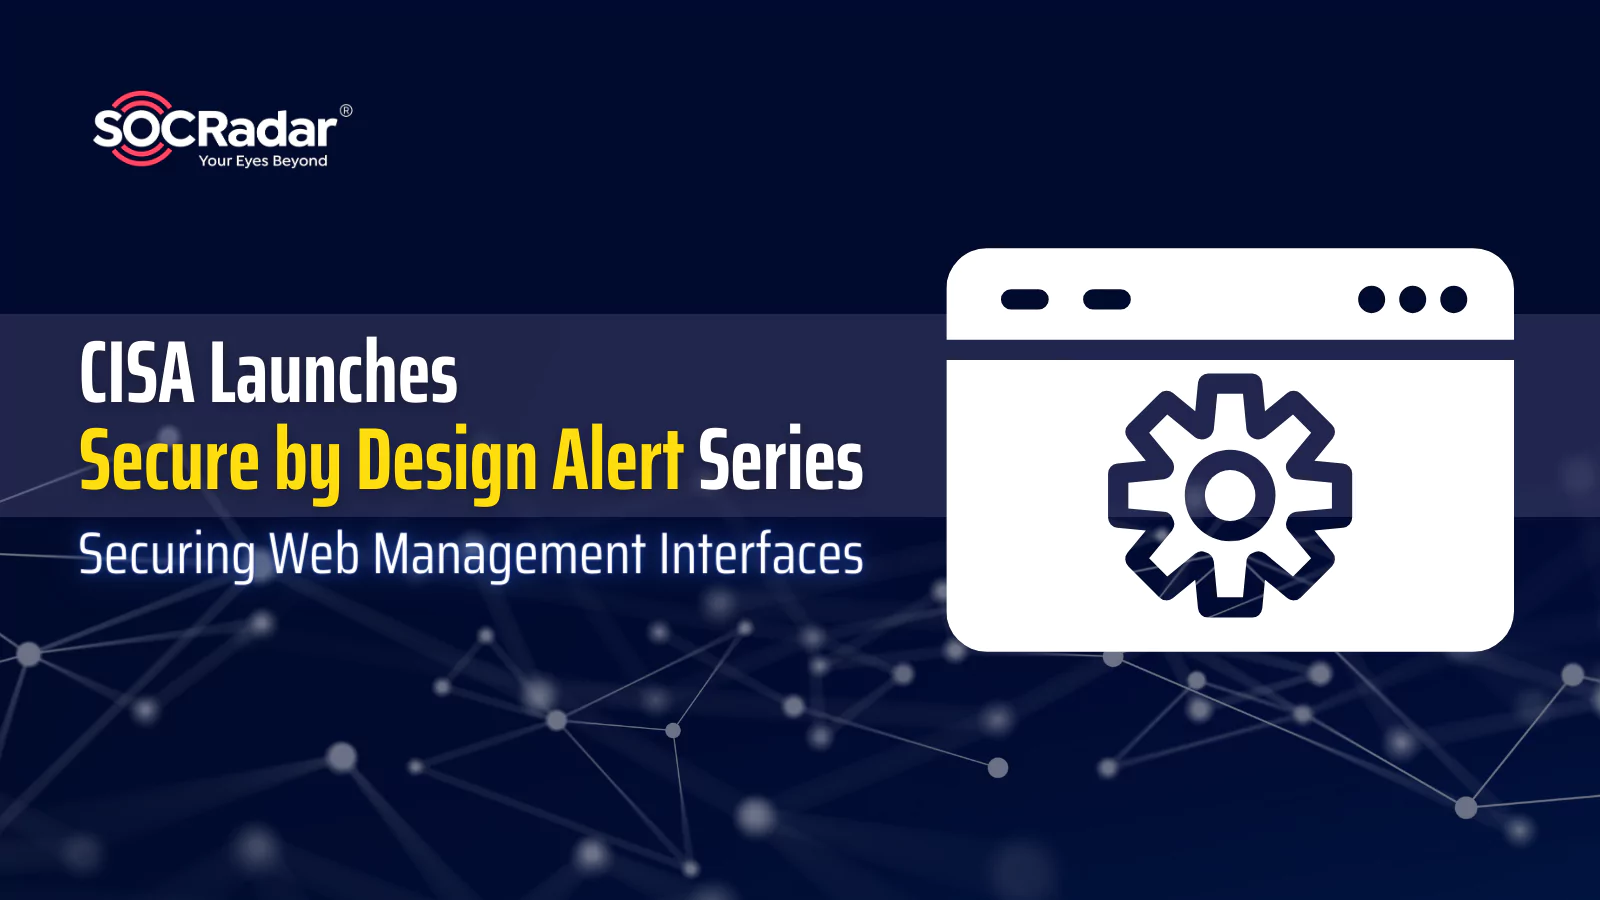 SOCRadar® Cyber Intelligence Inc. | CISA Launches “Secure by Design Alert” Series: Securing Web Management Interfaces